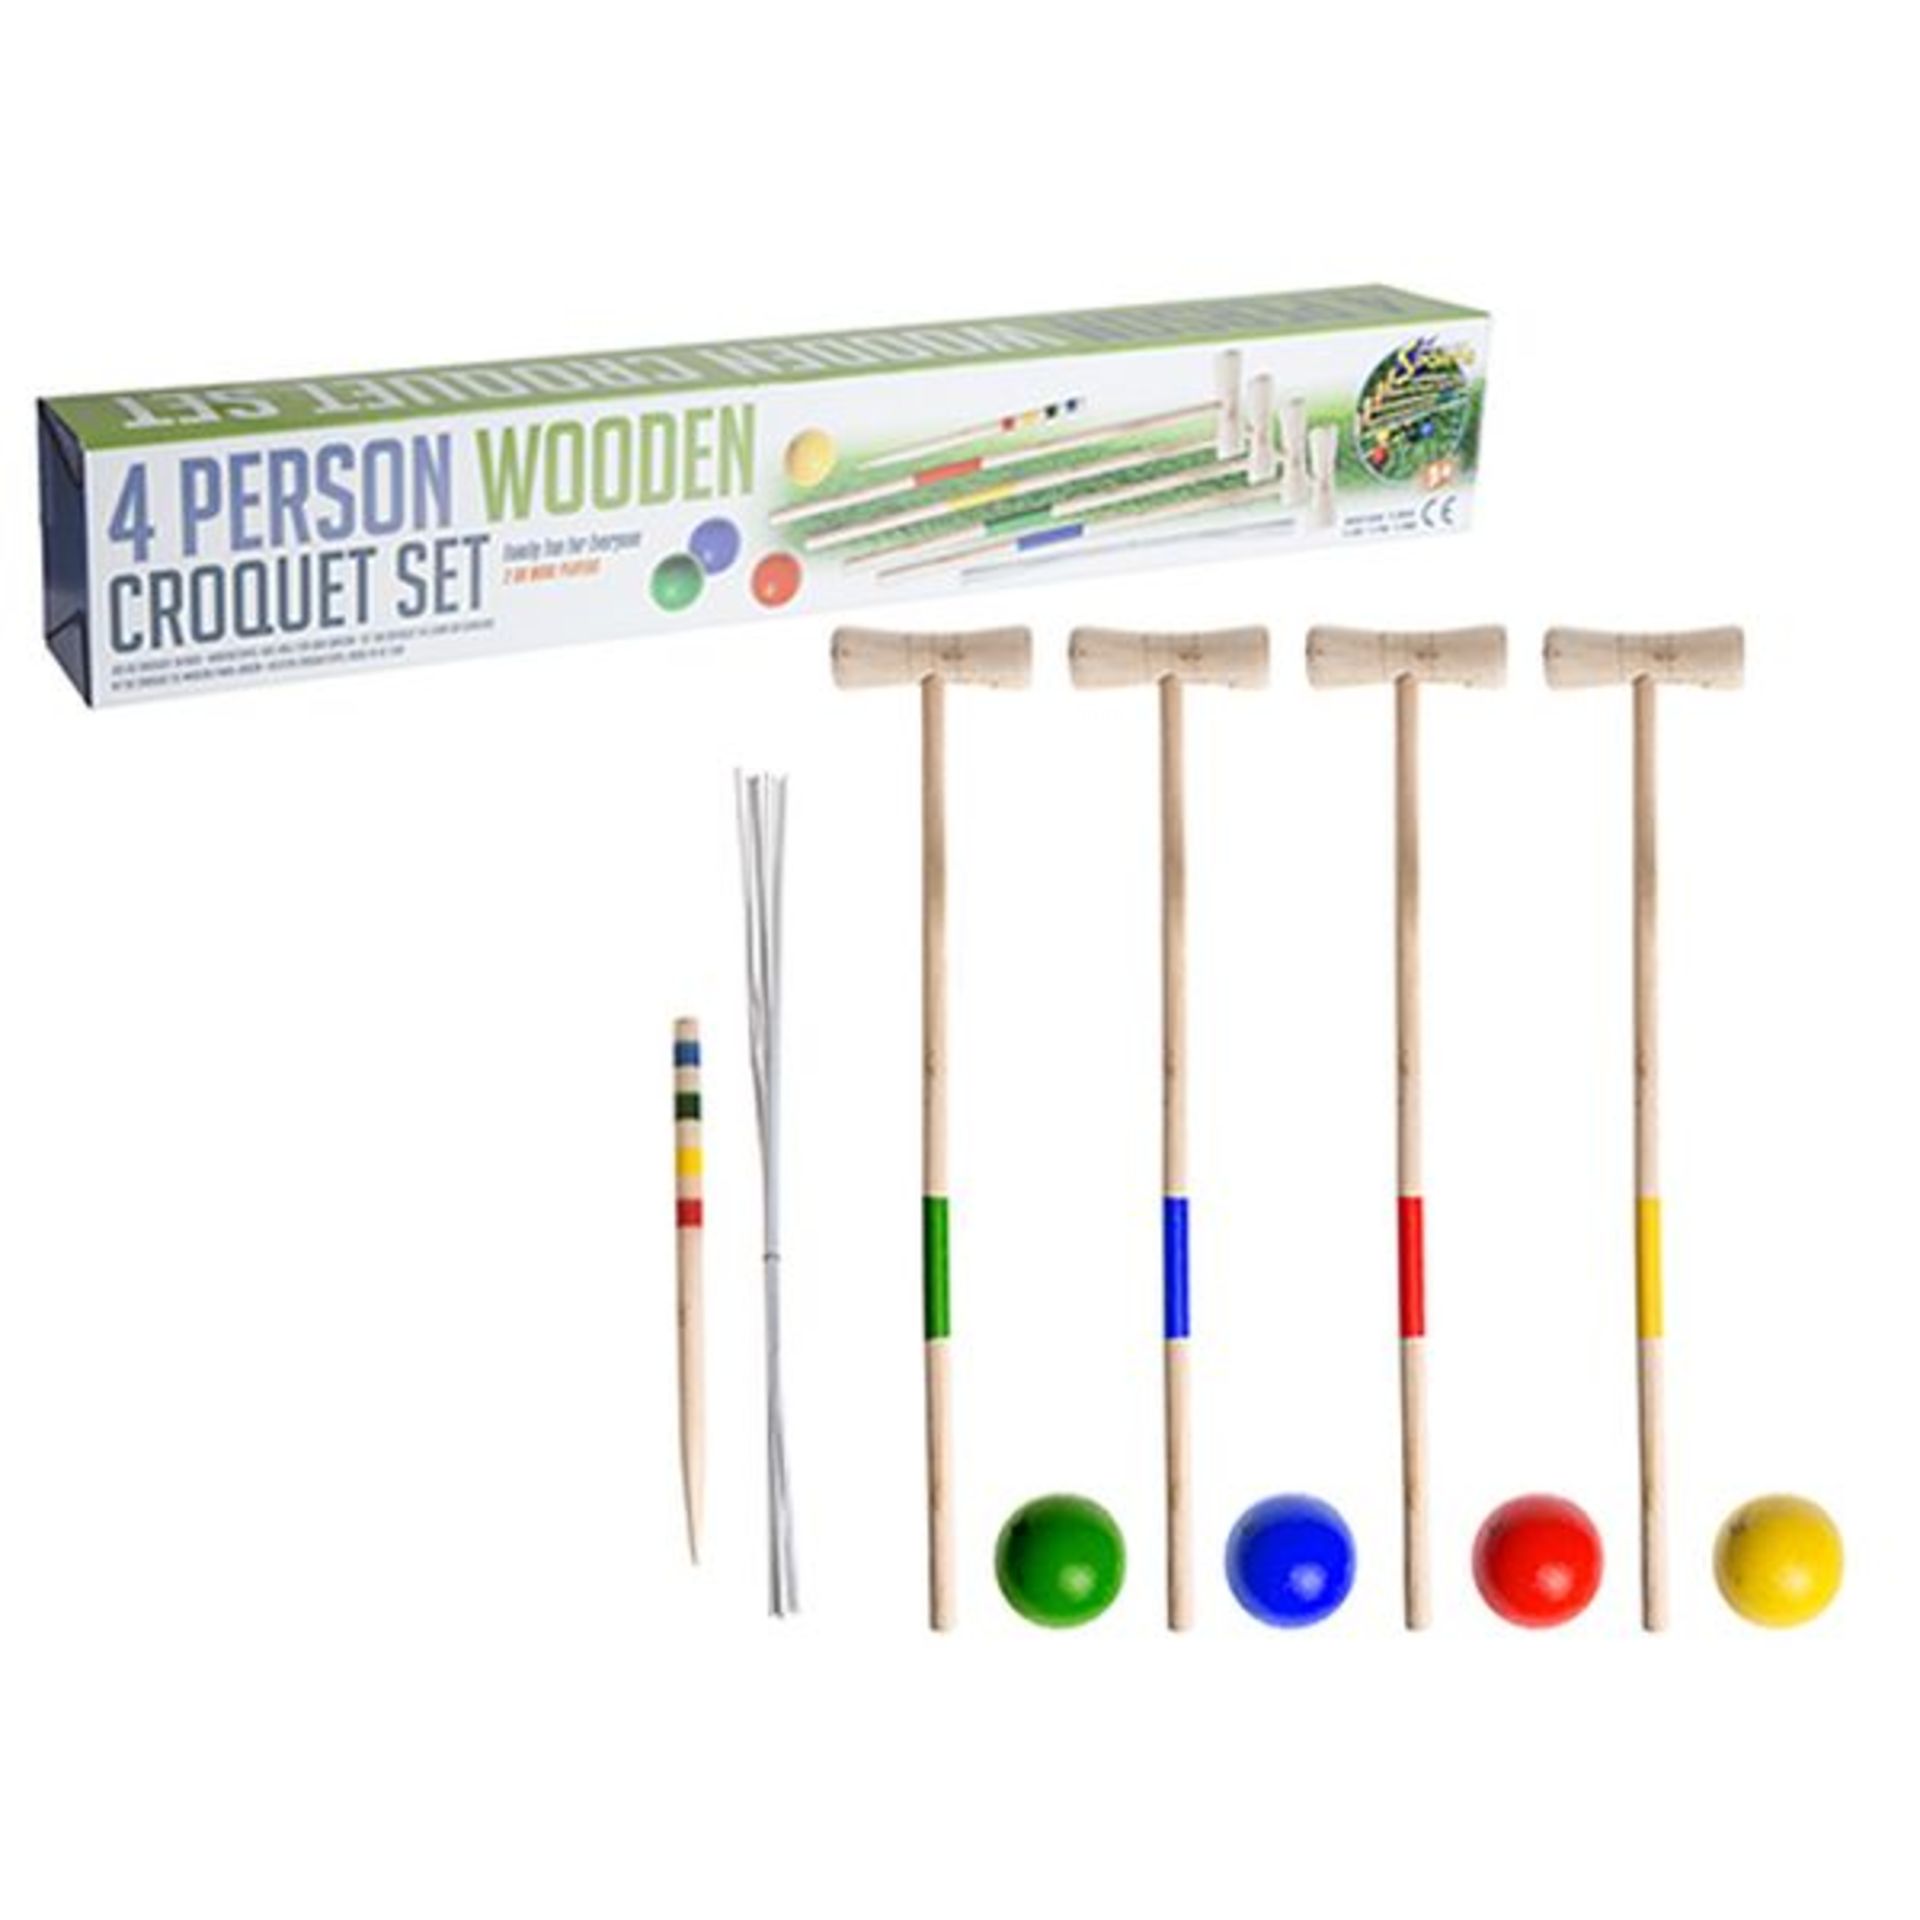 V Brand New Premier Sports Four Person Wooden Croquet Set - Image 2 of 2